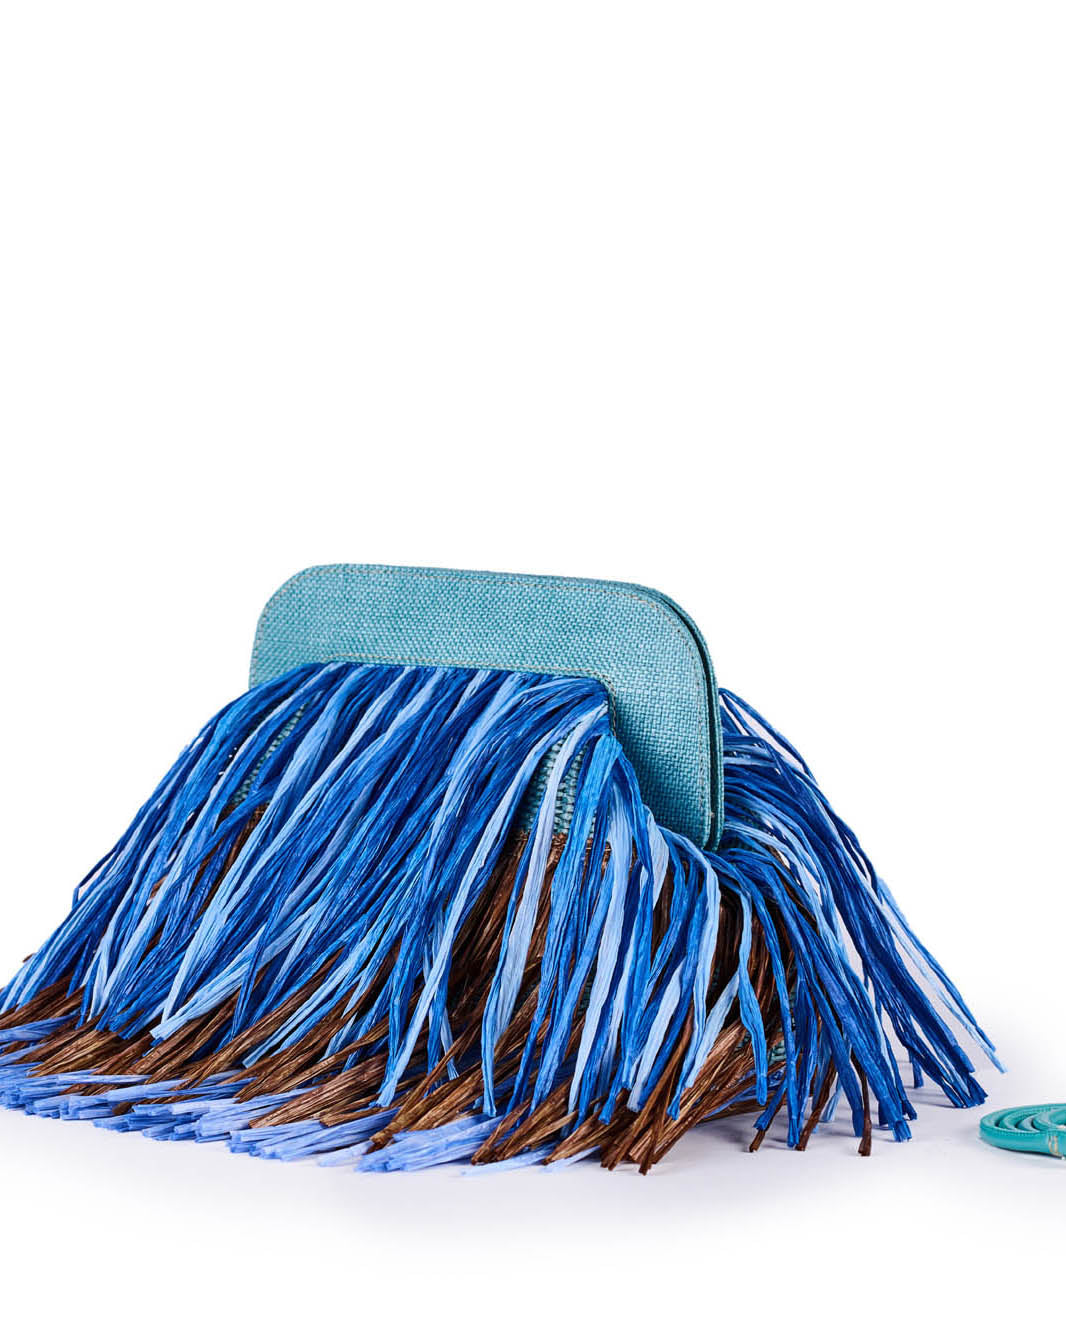 Blue handcrafted fringed handbag with unique design against white background